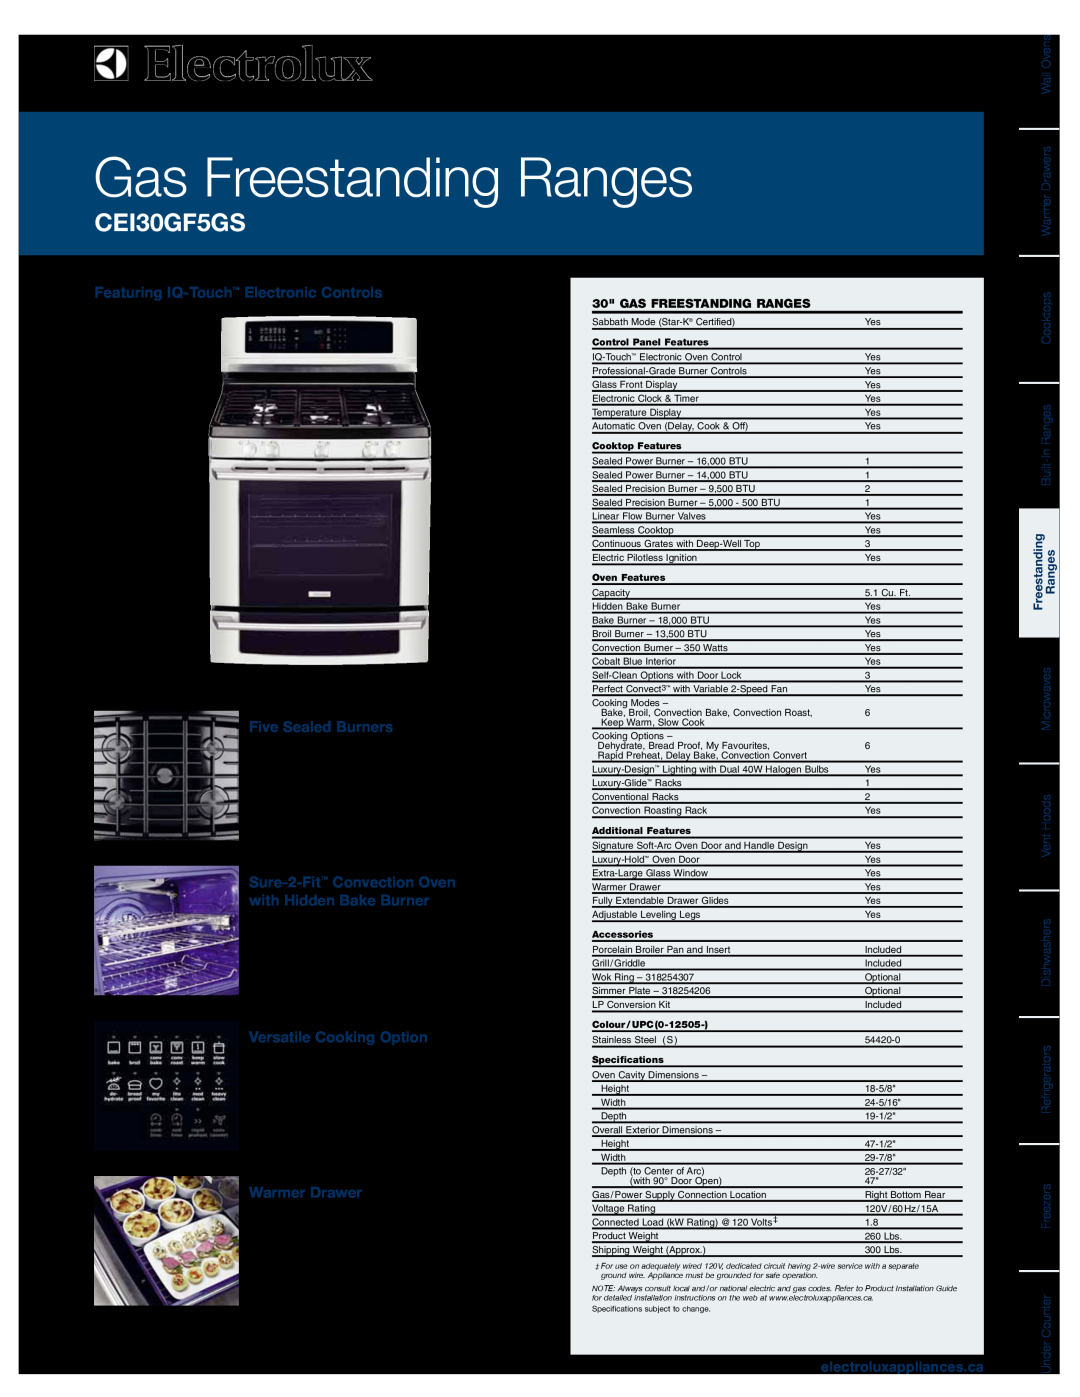 Electrolux CEI30GF5GS specifications Featuring IQ-Touch Electronic Controls, Five Sealed Burners, Versatile Cooking Option 